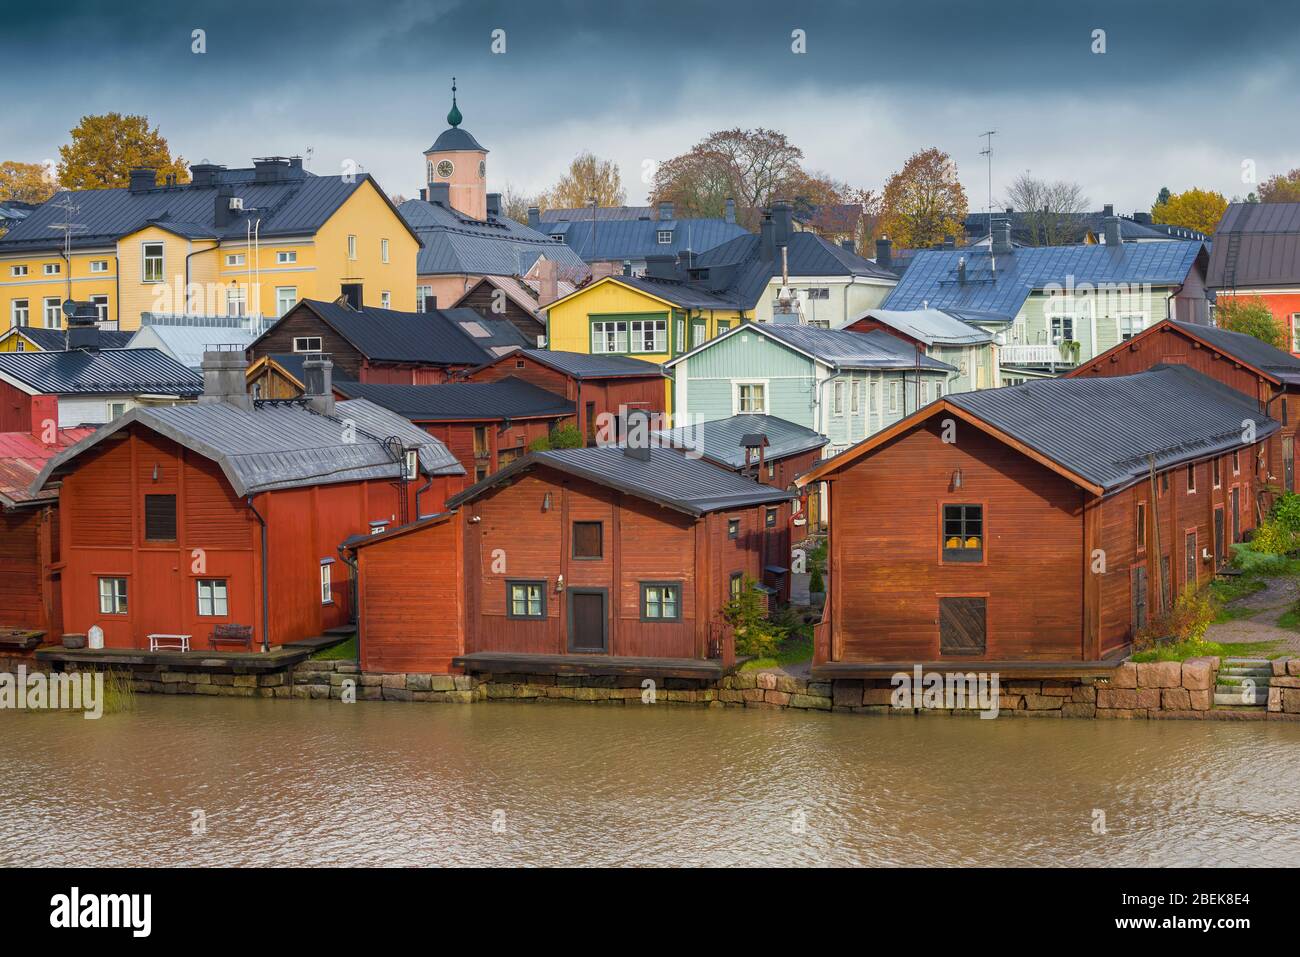 Old wooden barns on a cityscape on a cloudy October day. Old Porvoo, Finland Stock Photo